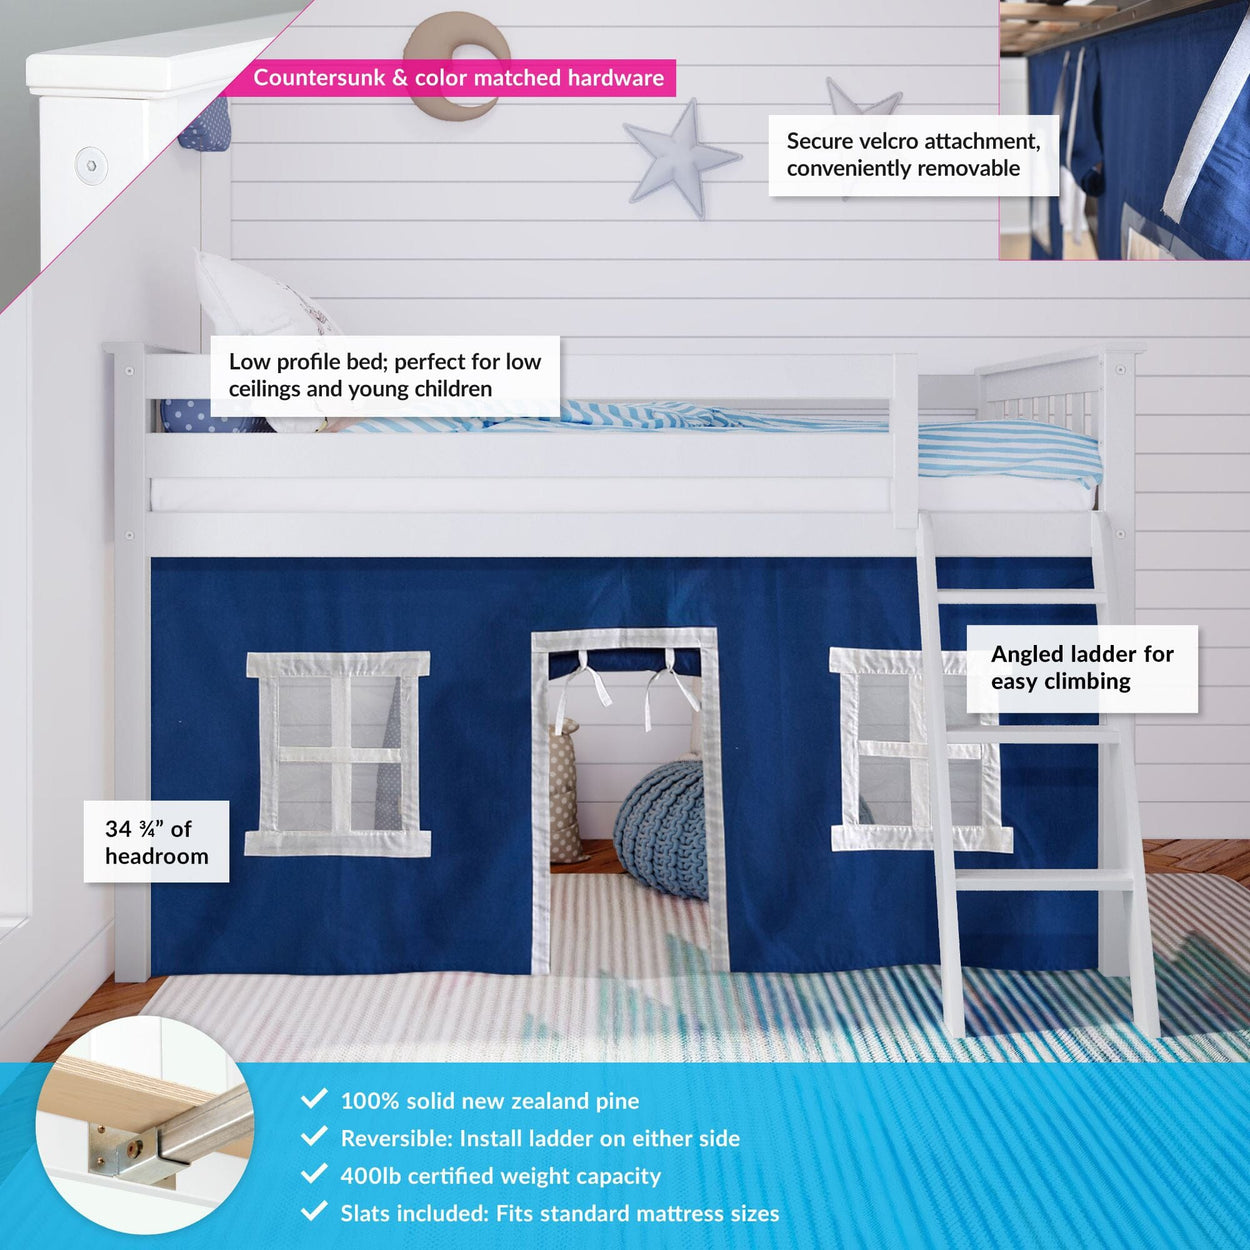 180212002022 : Loft Beds Twin-Size Low Loft With Curtain, White + Blue